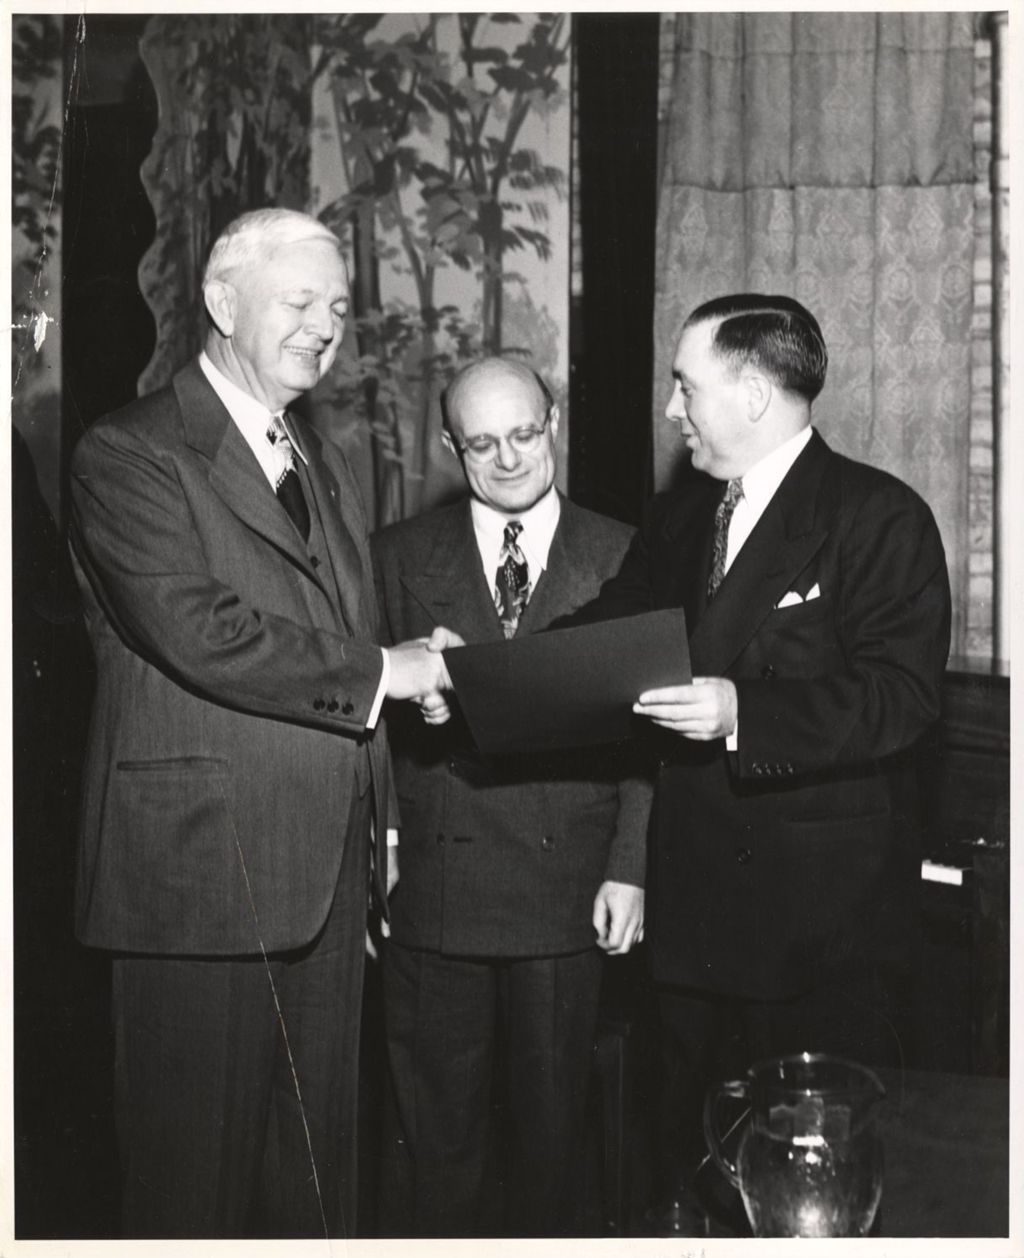 Miniature of Martin Kennelly shaking hands with Richard J. Daley